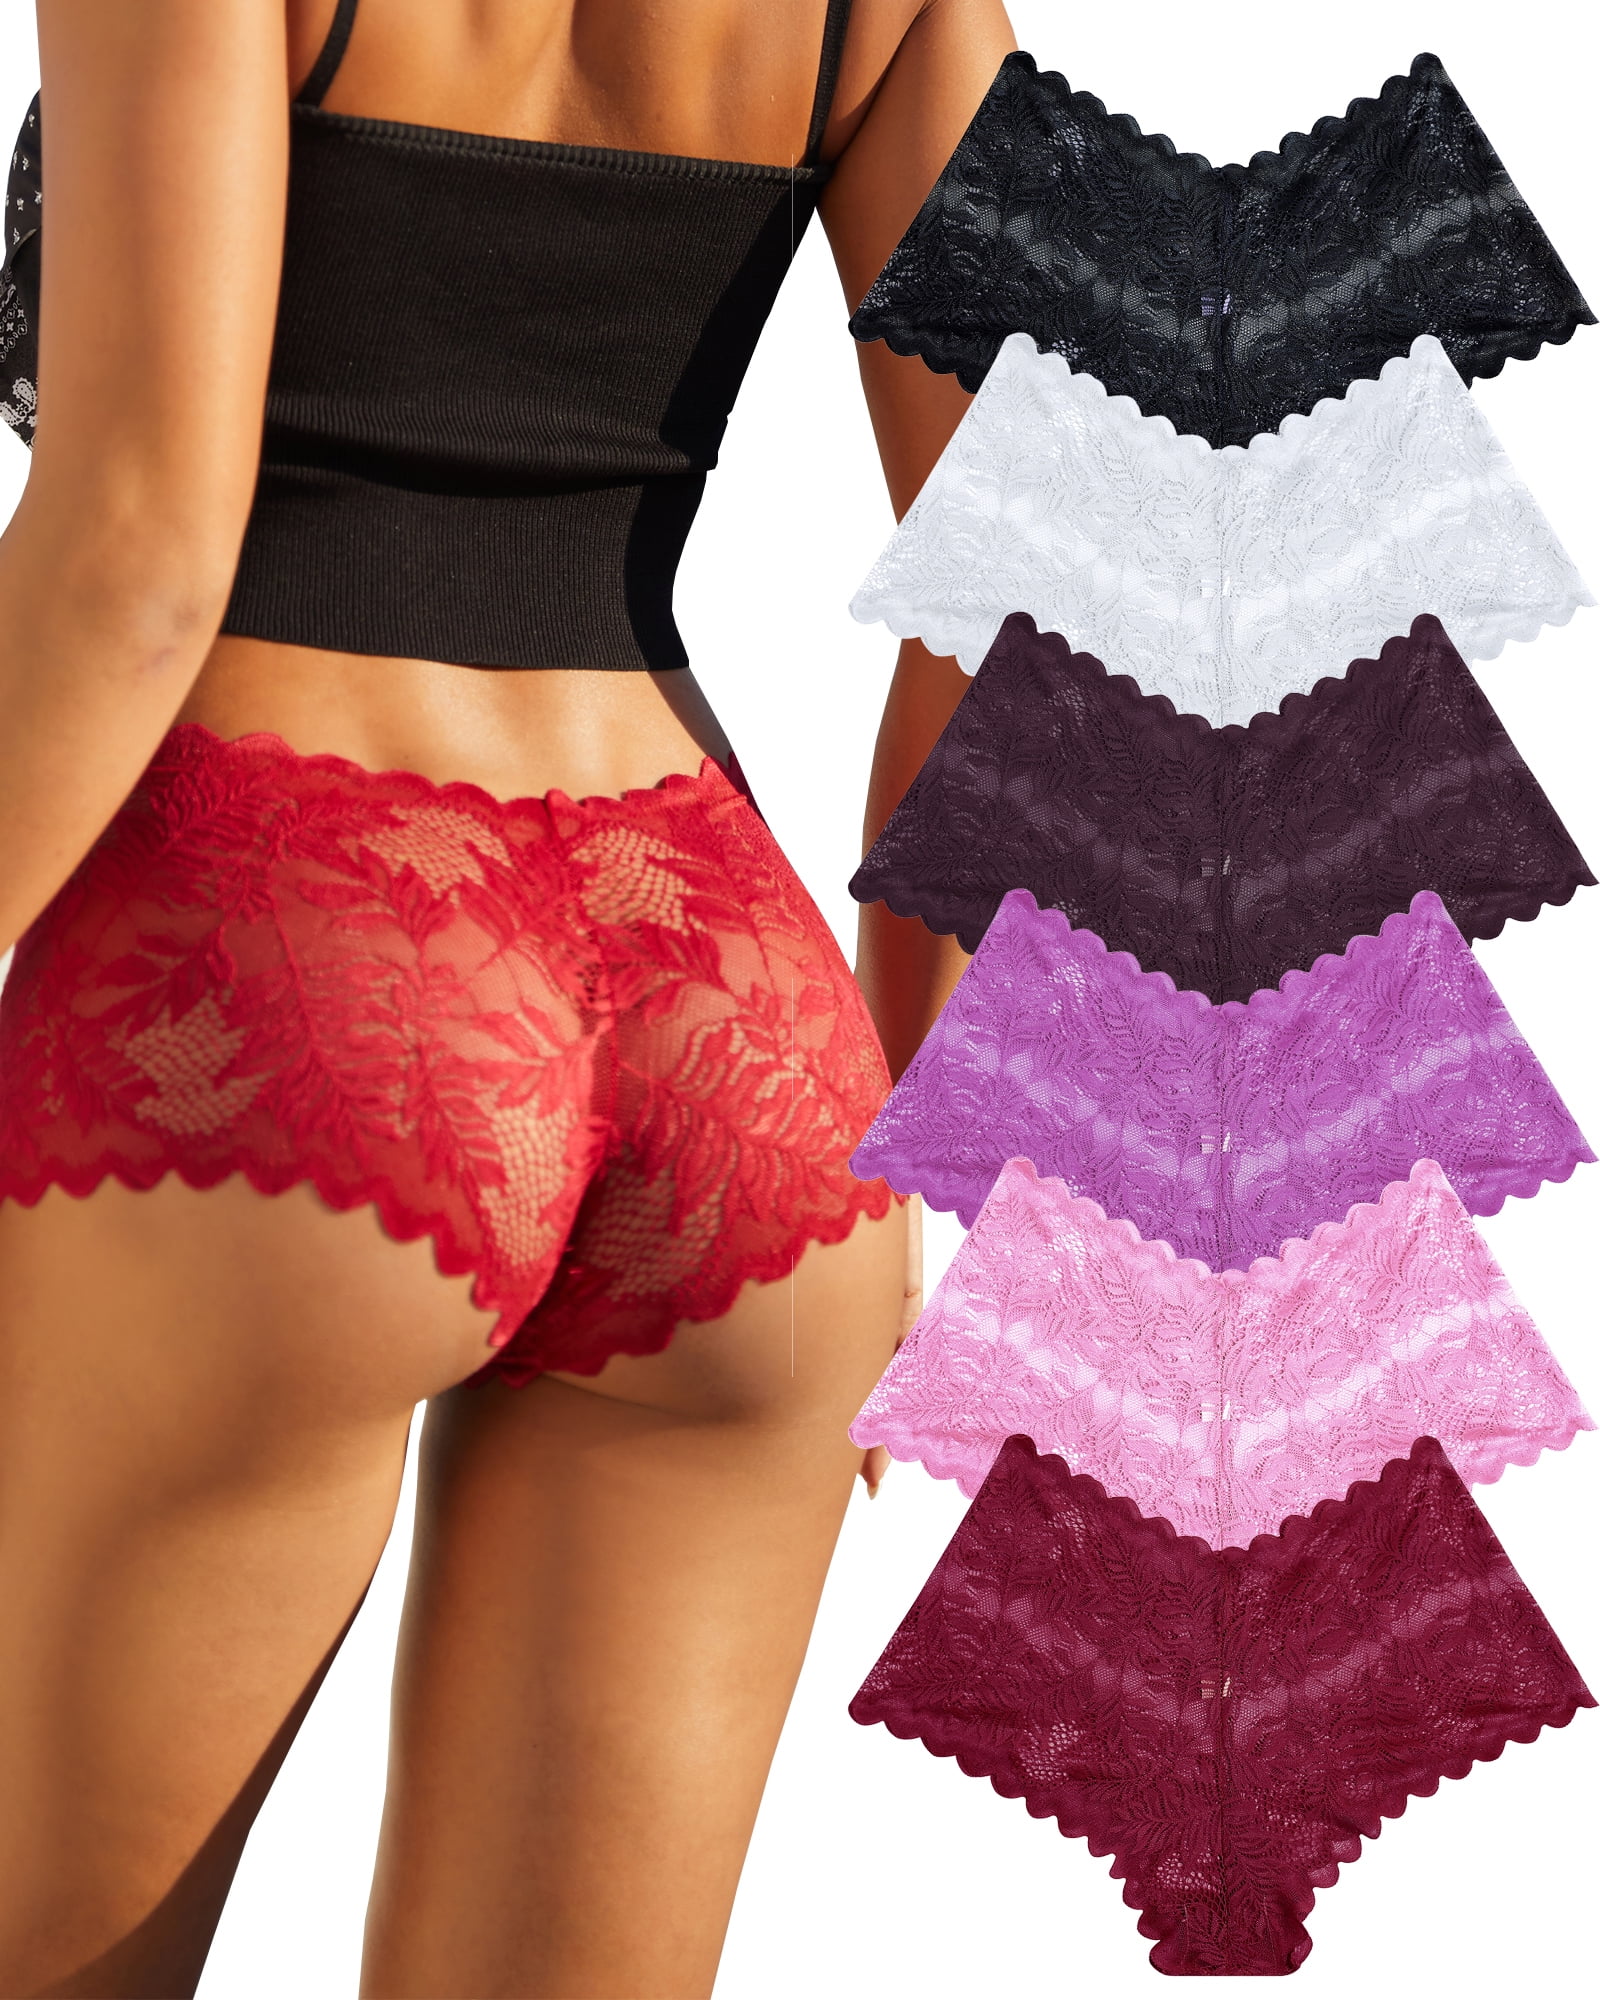 Women's Thong Seamless Underwear Fitness V Shaped Low Waist Breathable  Thong Underwear Bulk Panties Lace Bikini Underwear for Women Couples  Matching Underwear Thigh Chafing Lacy Panties Set Cotton 